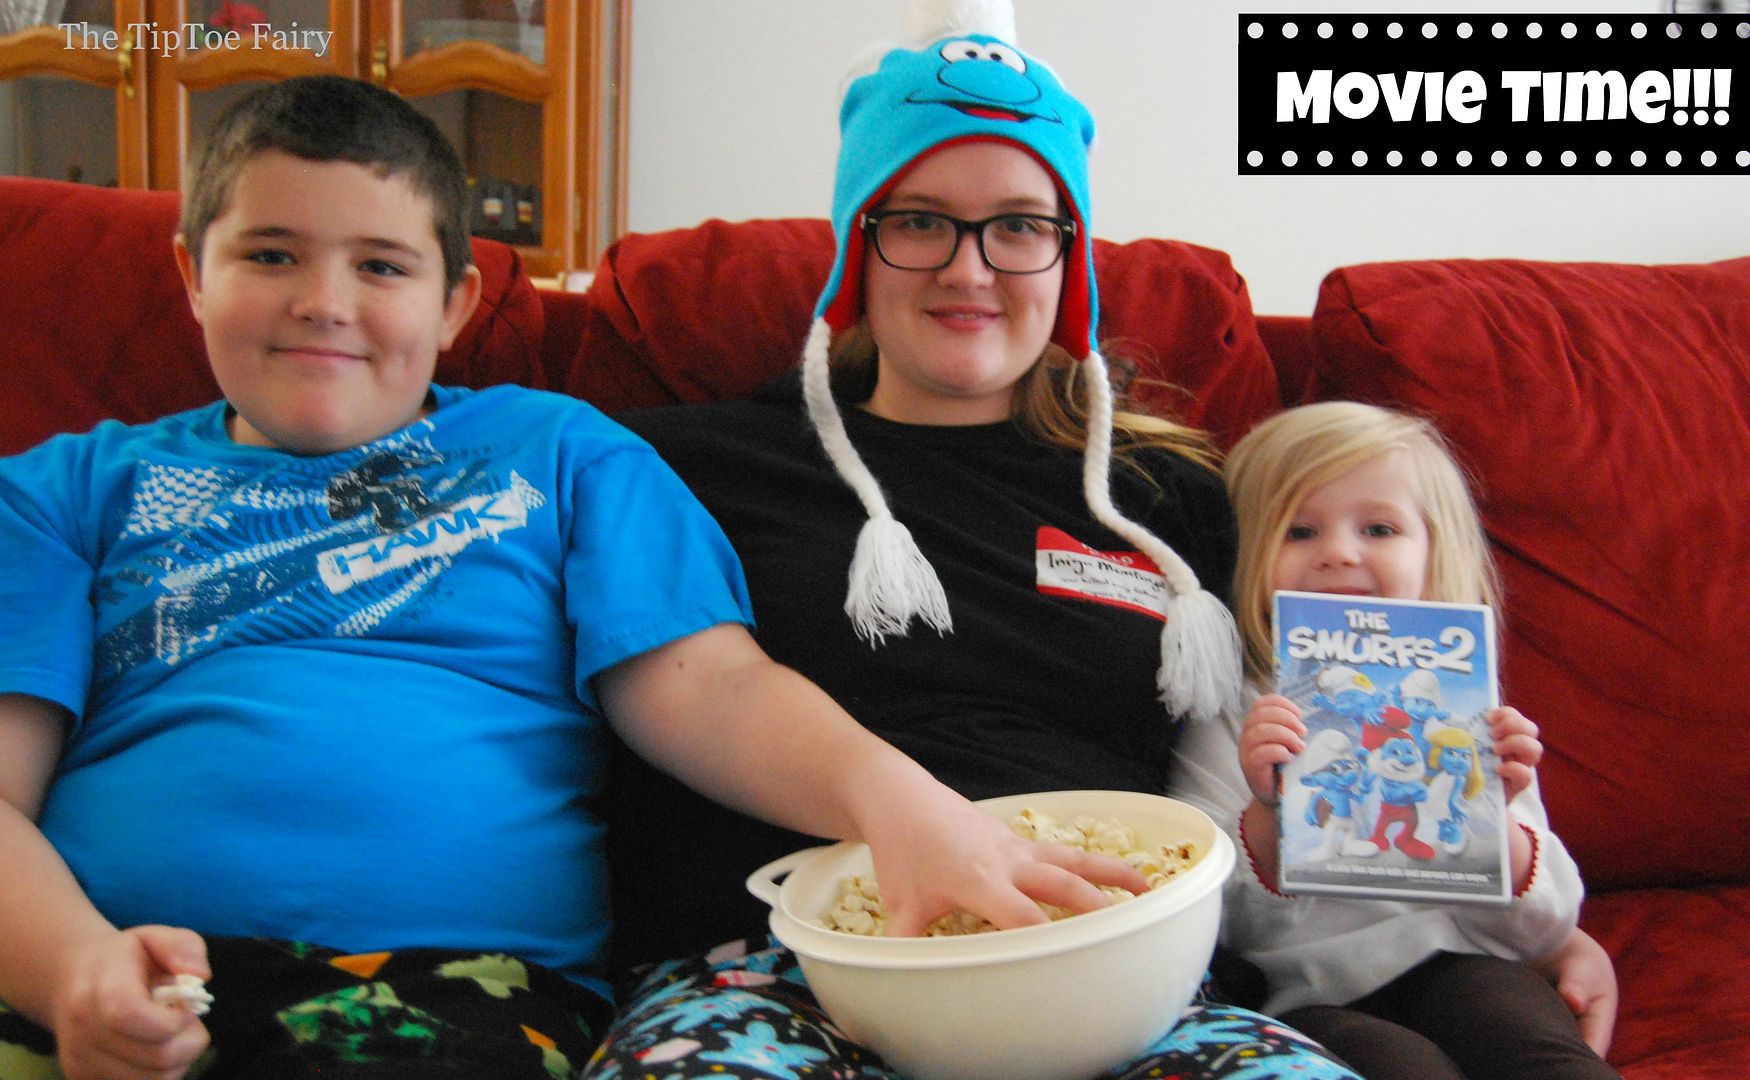 #shop #TastyTenders Family Movie Night with The Smurfs 2